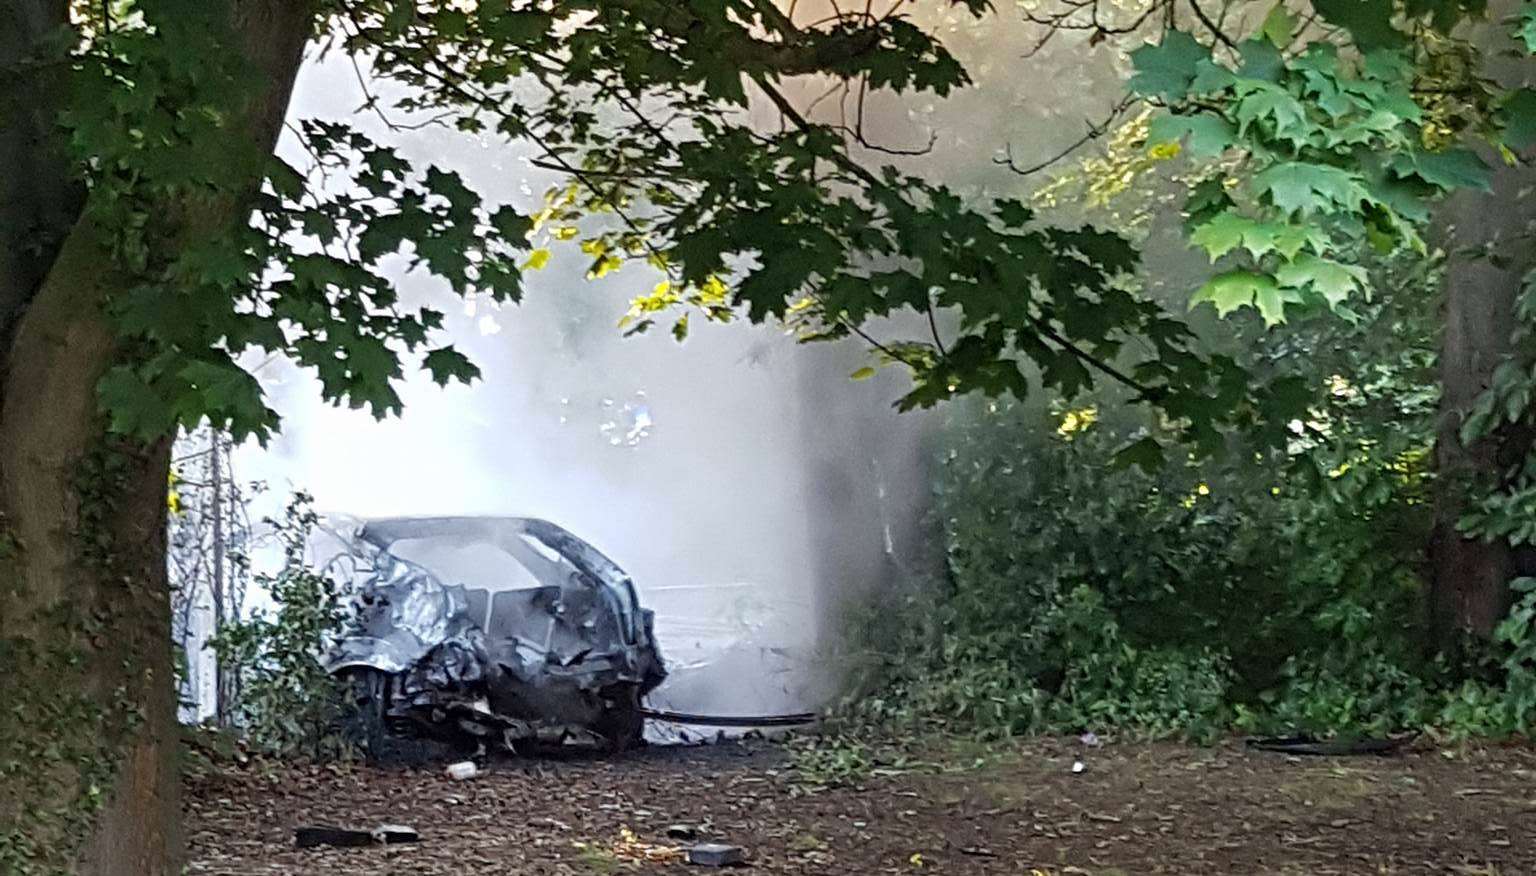 Smoke was seen coming from the car